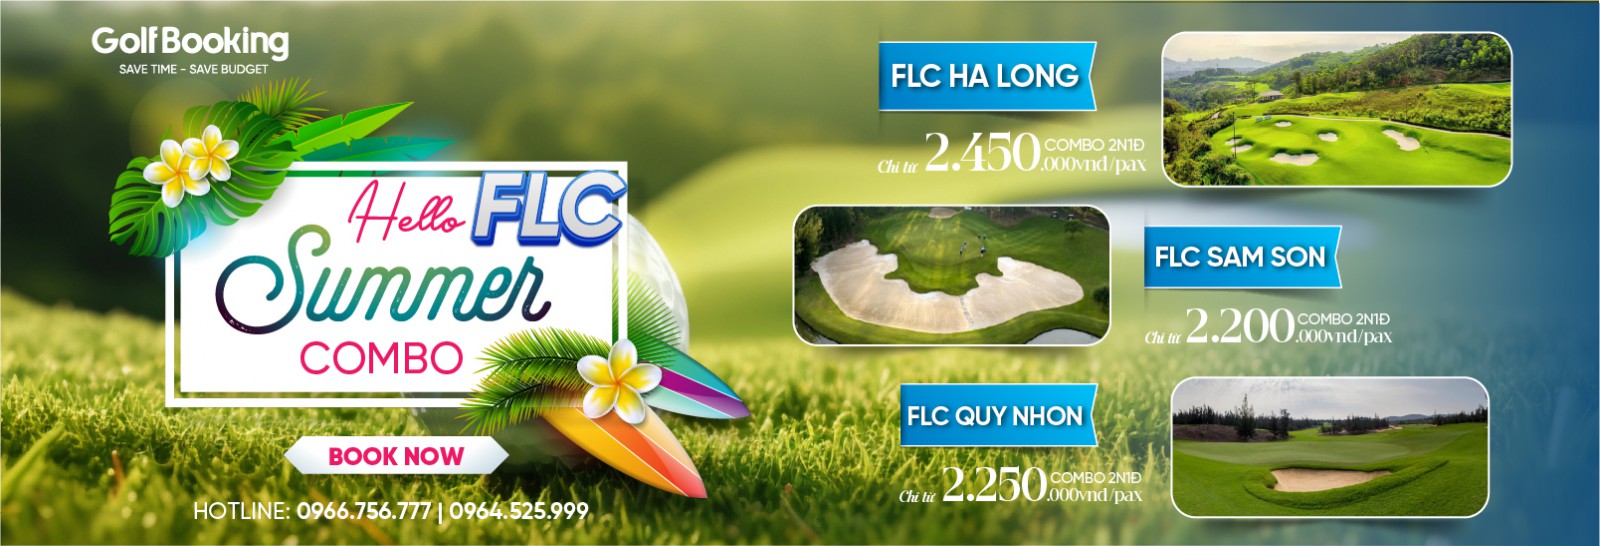 STAY & PLAY IN FLC GOLF COURSE